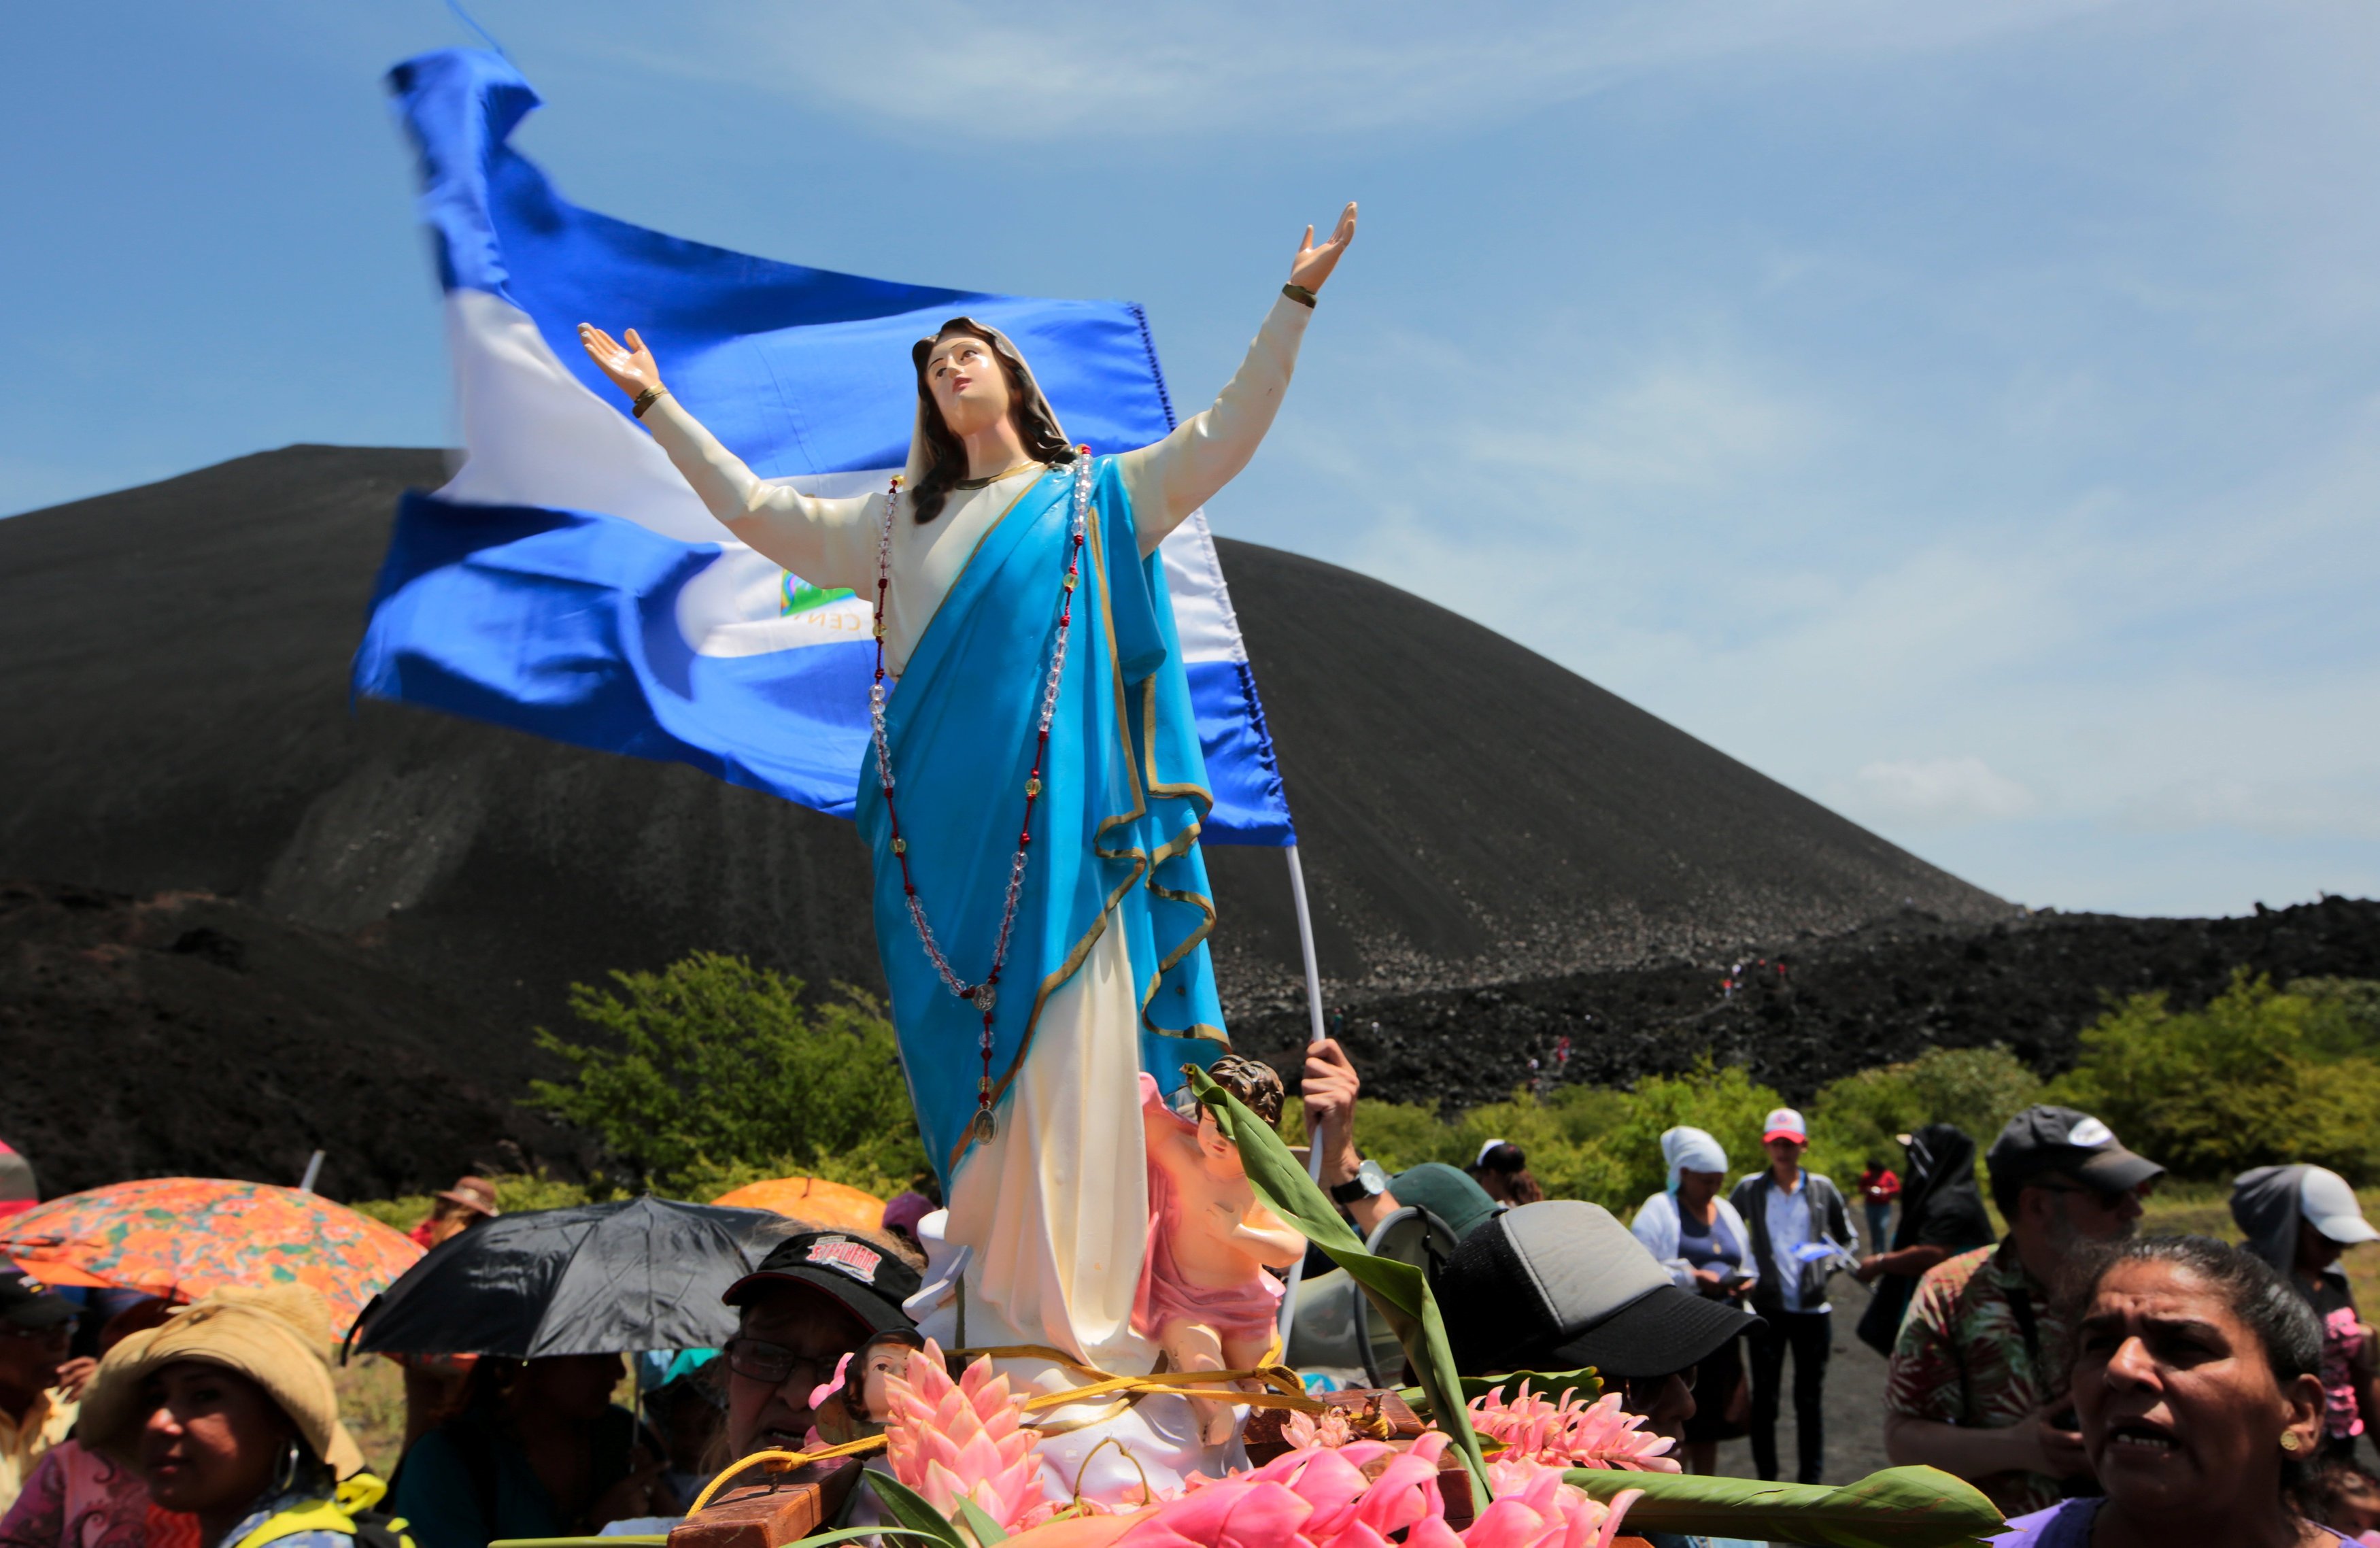 Nicaraguans carry a statue of Mary during an Aug. 14, 2018,  pilgrimage in Leon to demand an end to violence in the country. Aug. 15 is the feast of the Assumption of Mary. For several years now, the regime of President Daniel Ortega and his wife, Vice President Rosario Murillo, have branded priests and bishops as "terrorists" and "coup mongers," while curtailing public demonstrations of faith — such as processions and patron saint celebrations.(CNS photo/Oswaldo Rivas, Reuters)